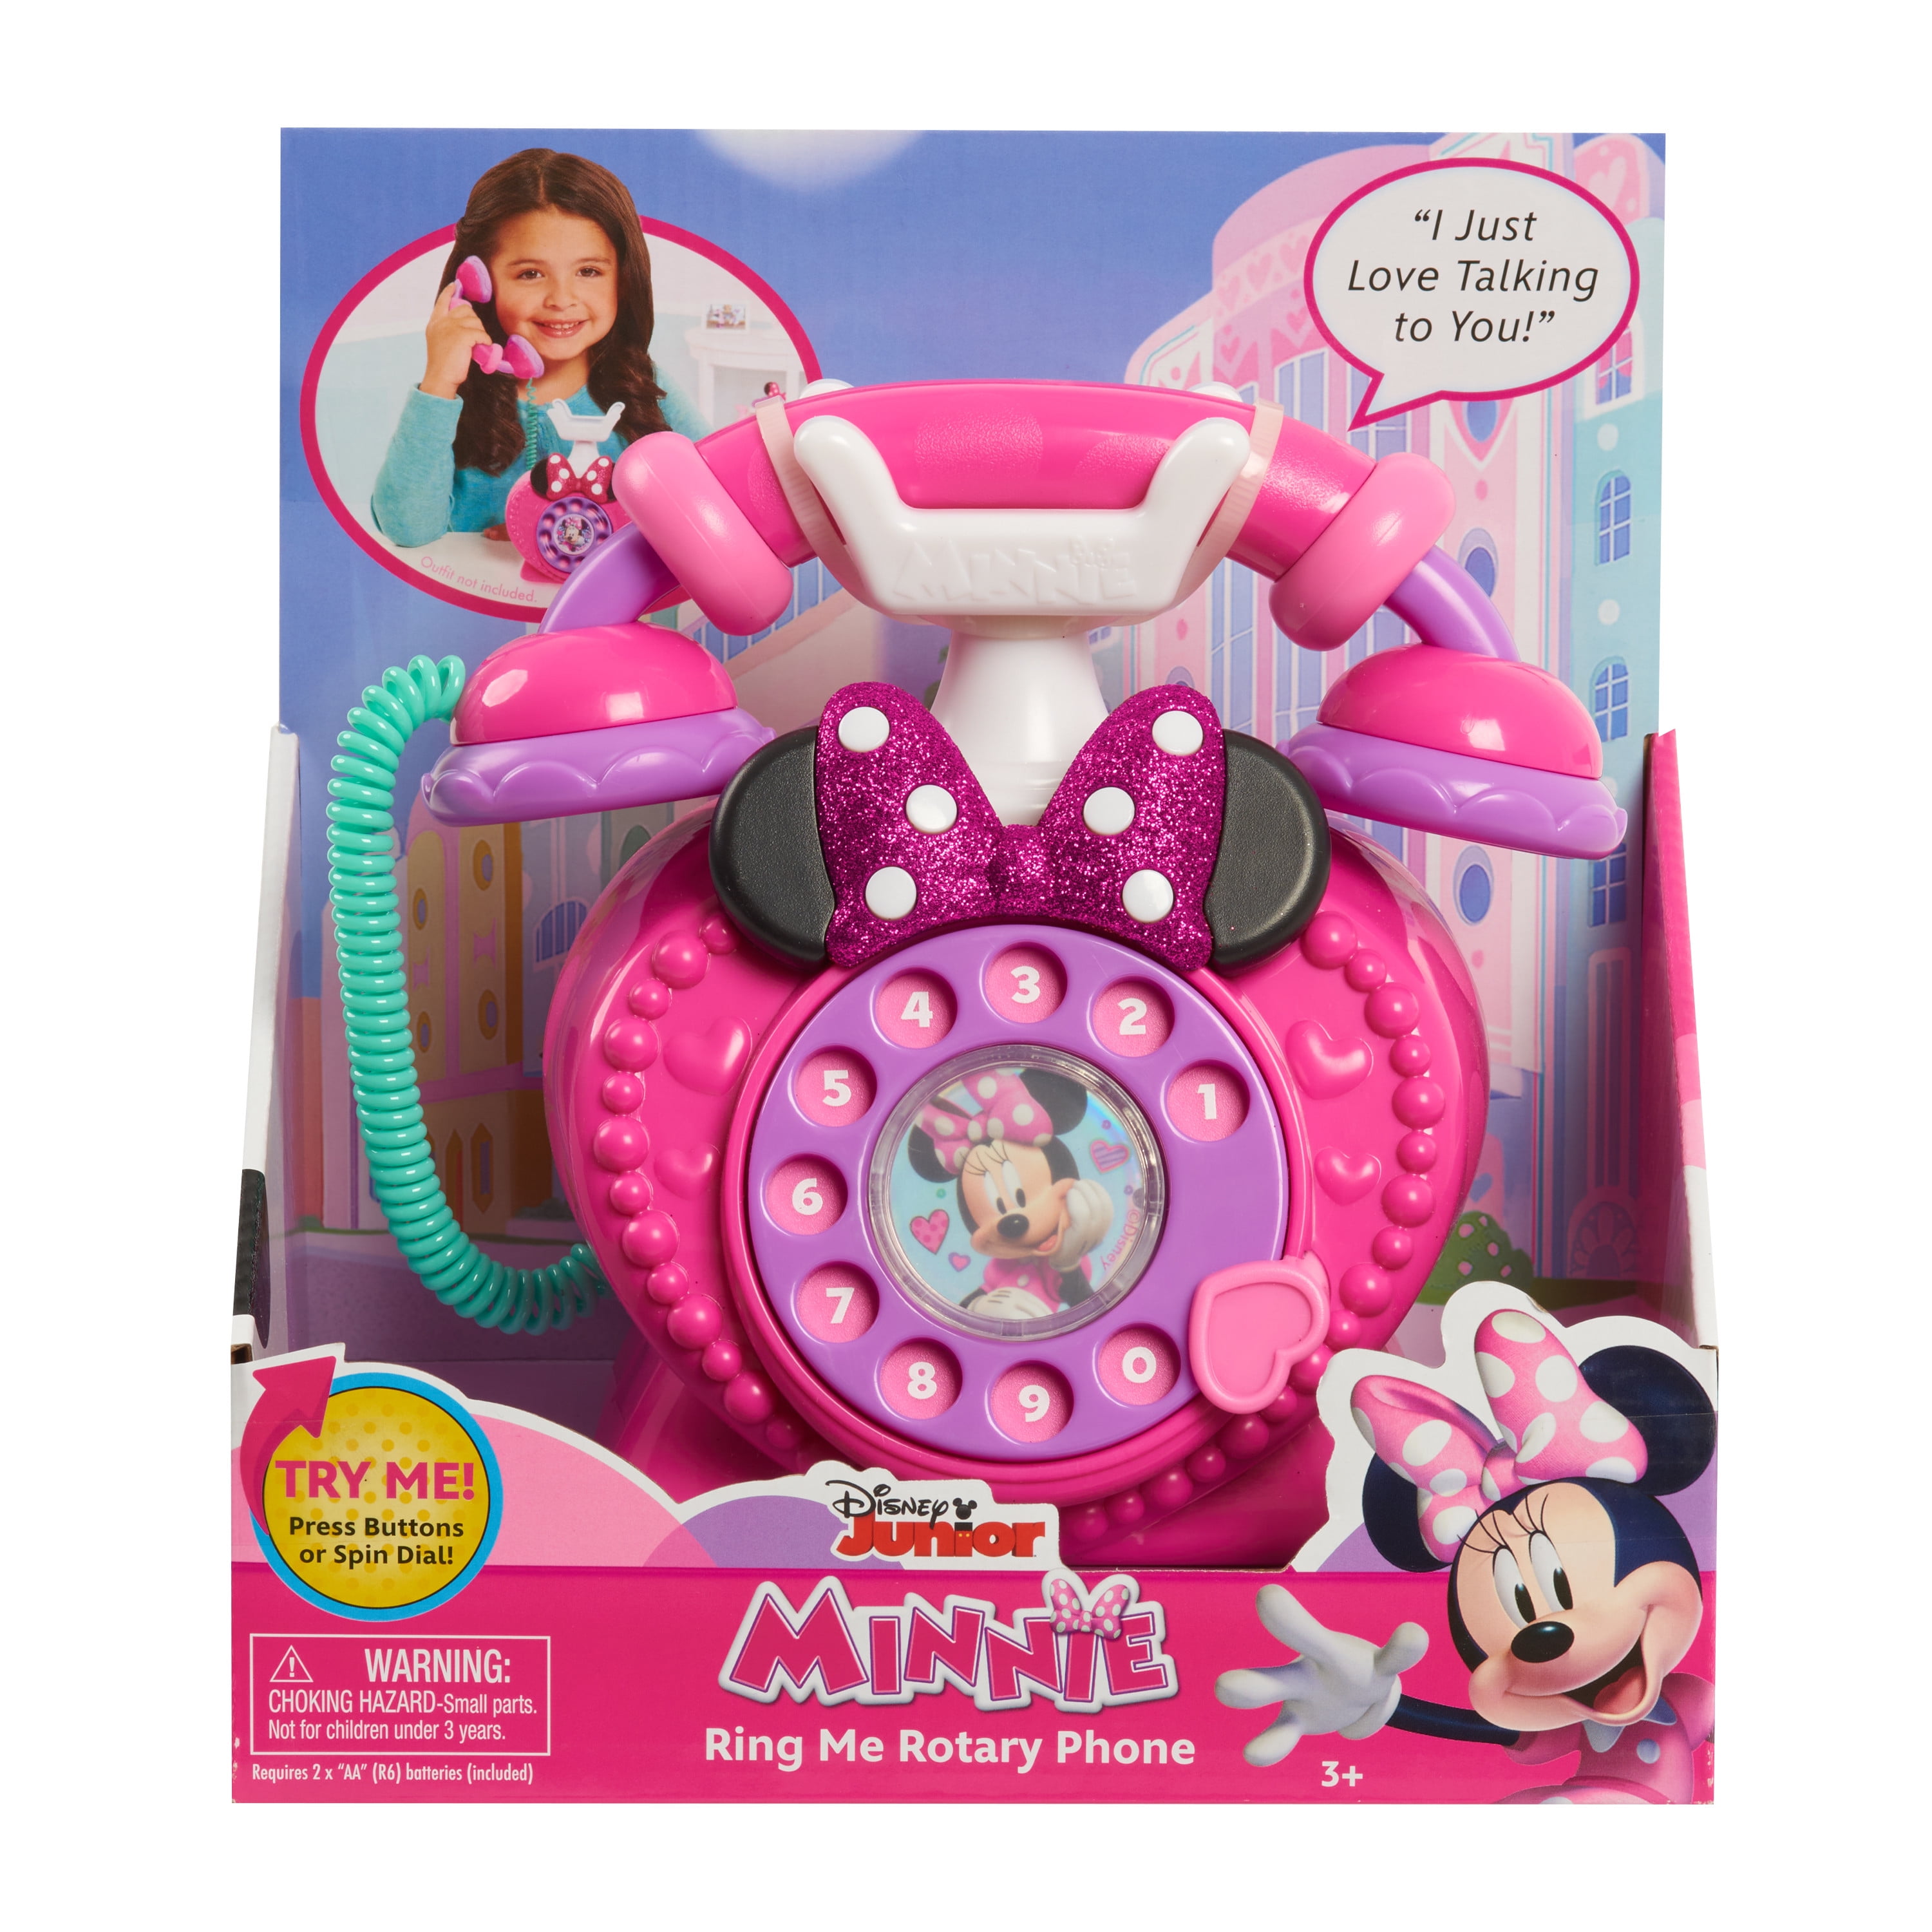 Minnie Mouse Play Phone Rotary Set Toys Kids Toddler Pretend Girl Gift Sound NEW 